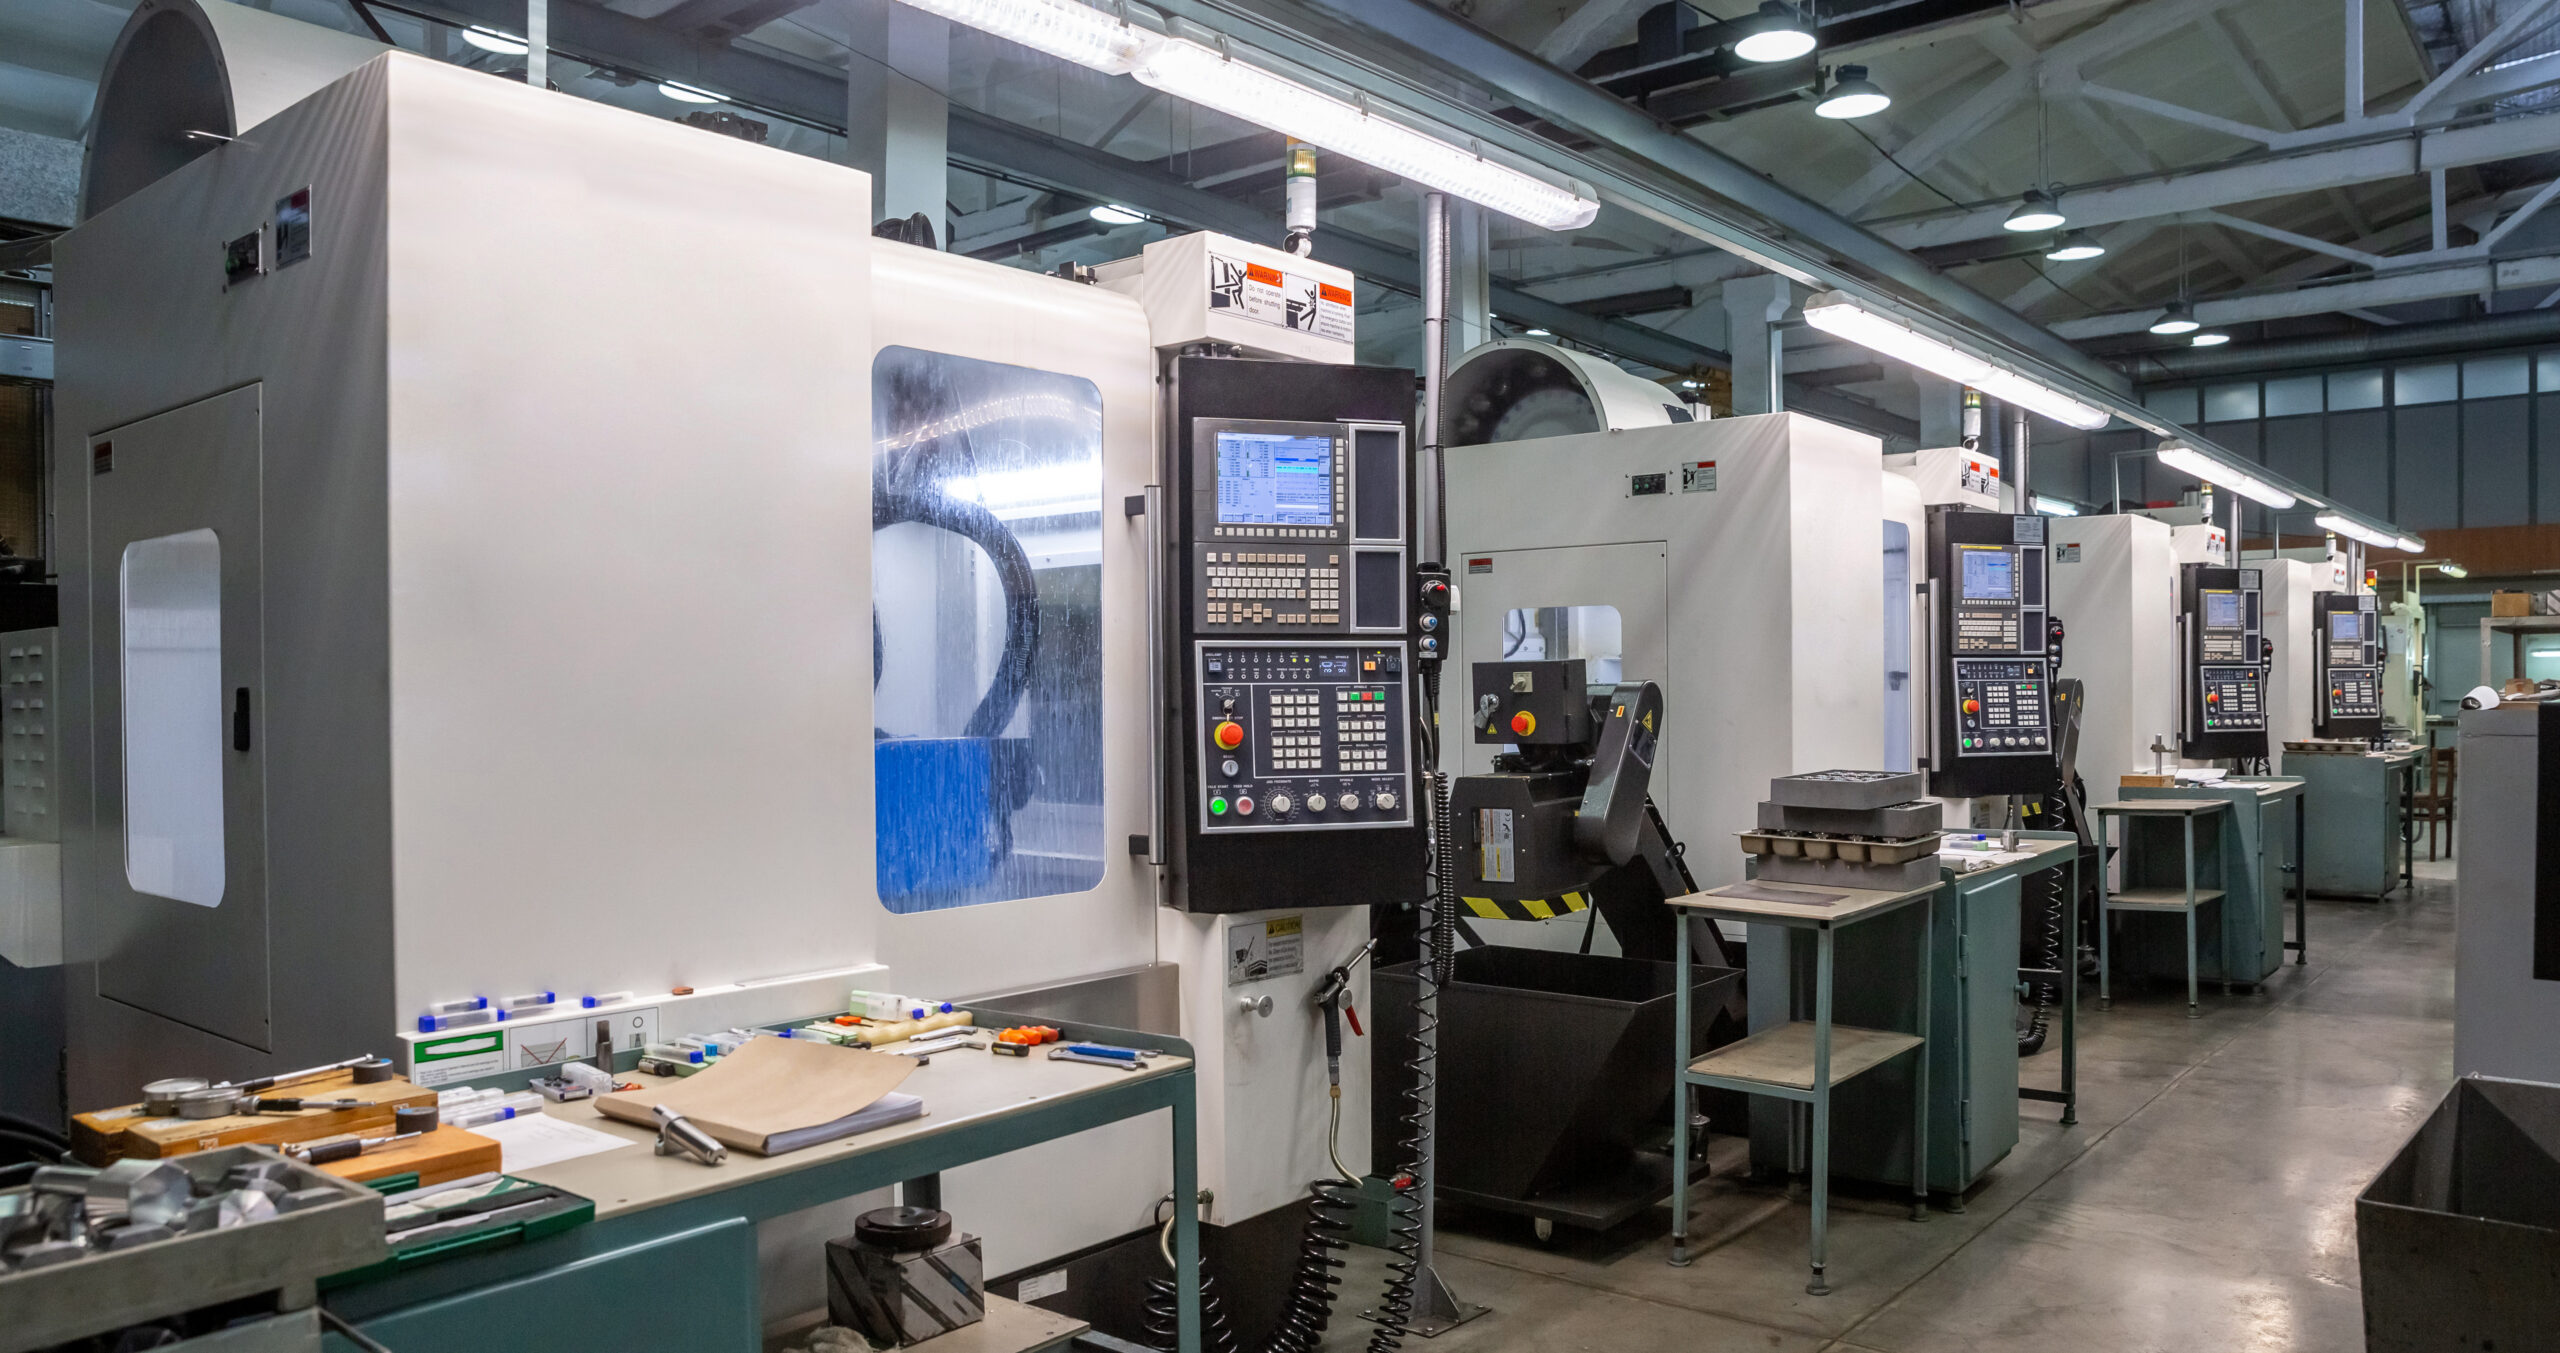 modern cnc lathes in the metalworking industry. A series of several machines